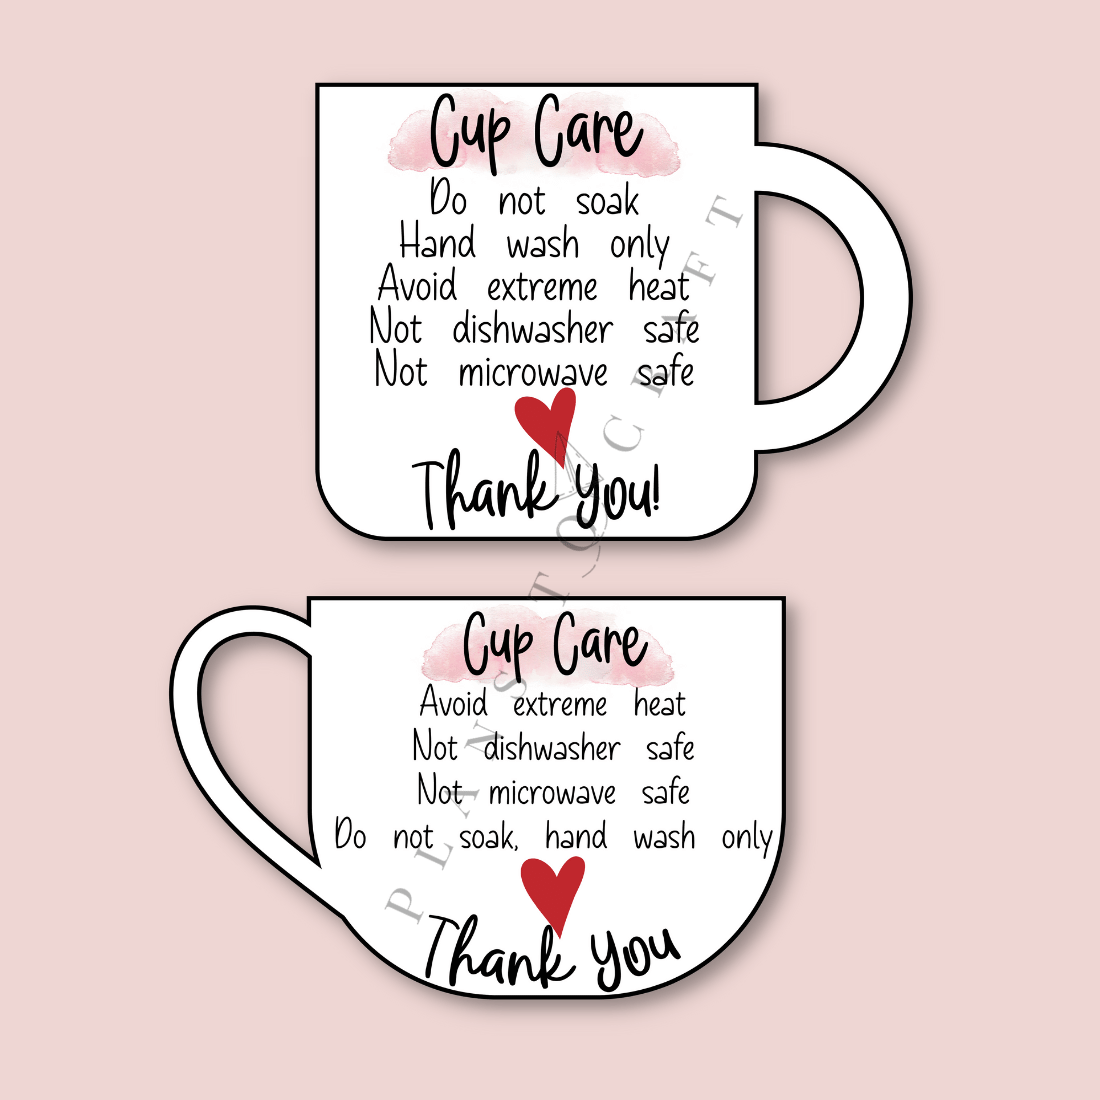 Two coffee mugs with a thank note written on them.